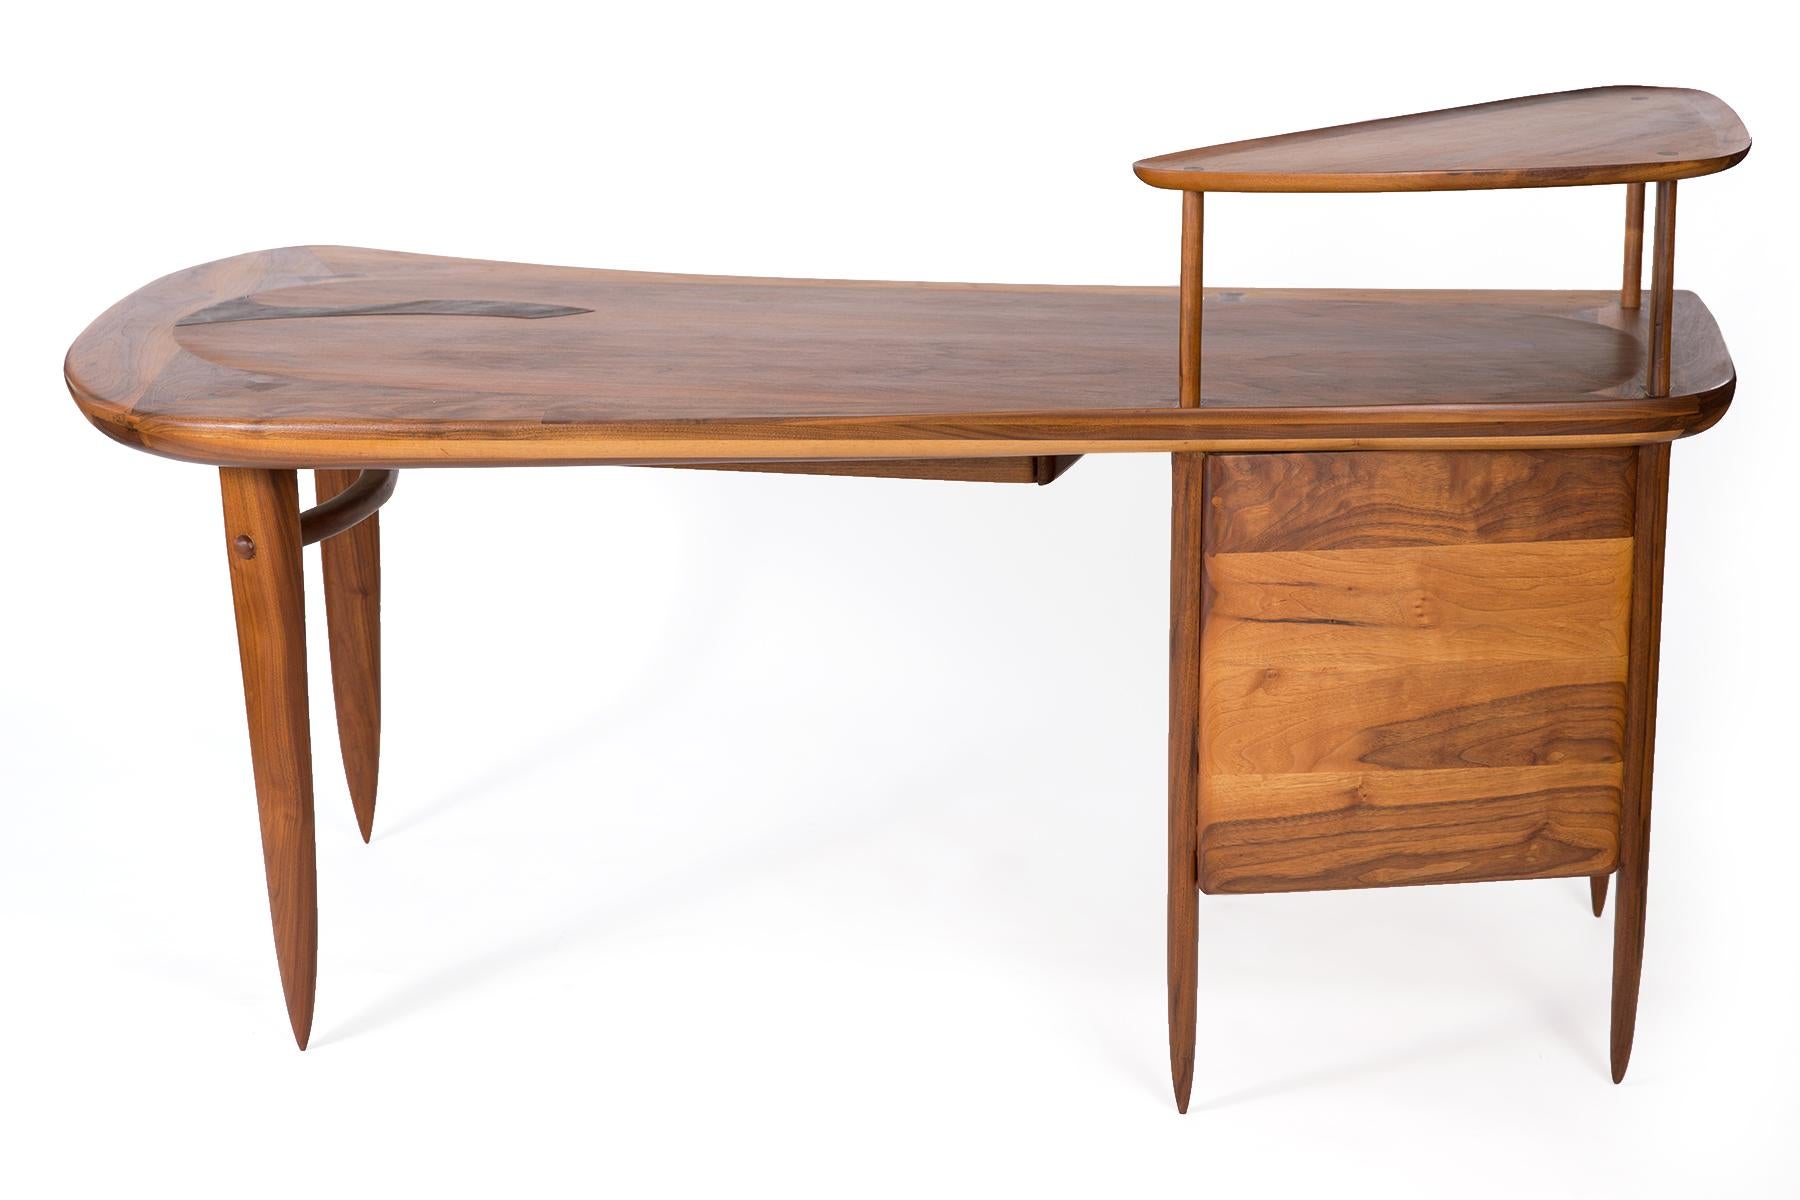 Walnut and steel one off desk by Arizona designer Allen Ditson, circa 1959. This sculptural and rare example has tapered solid walnut legs, free form solid walnut top with inset steel detailing, and is finished on all sides.

Dimensions: 71